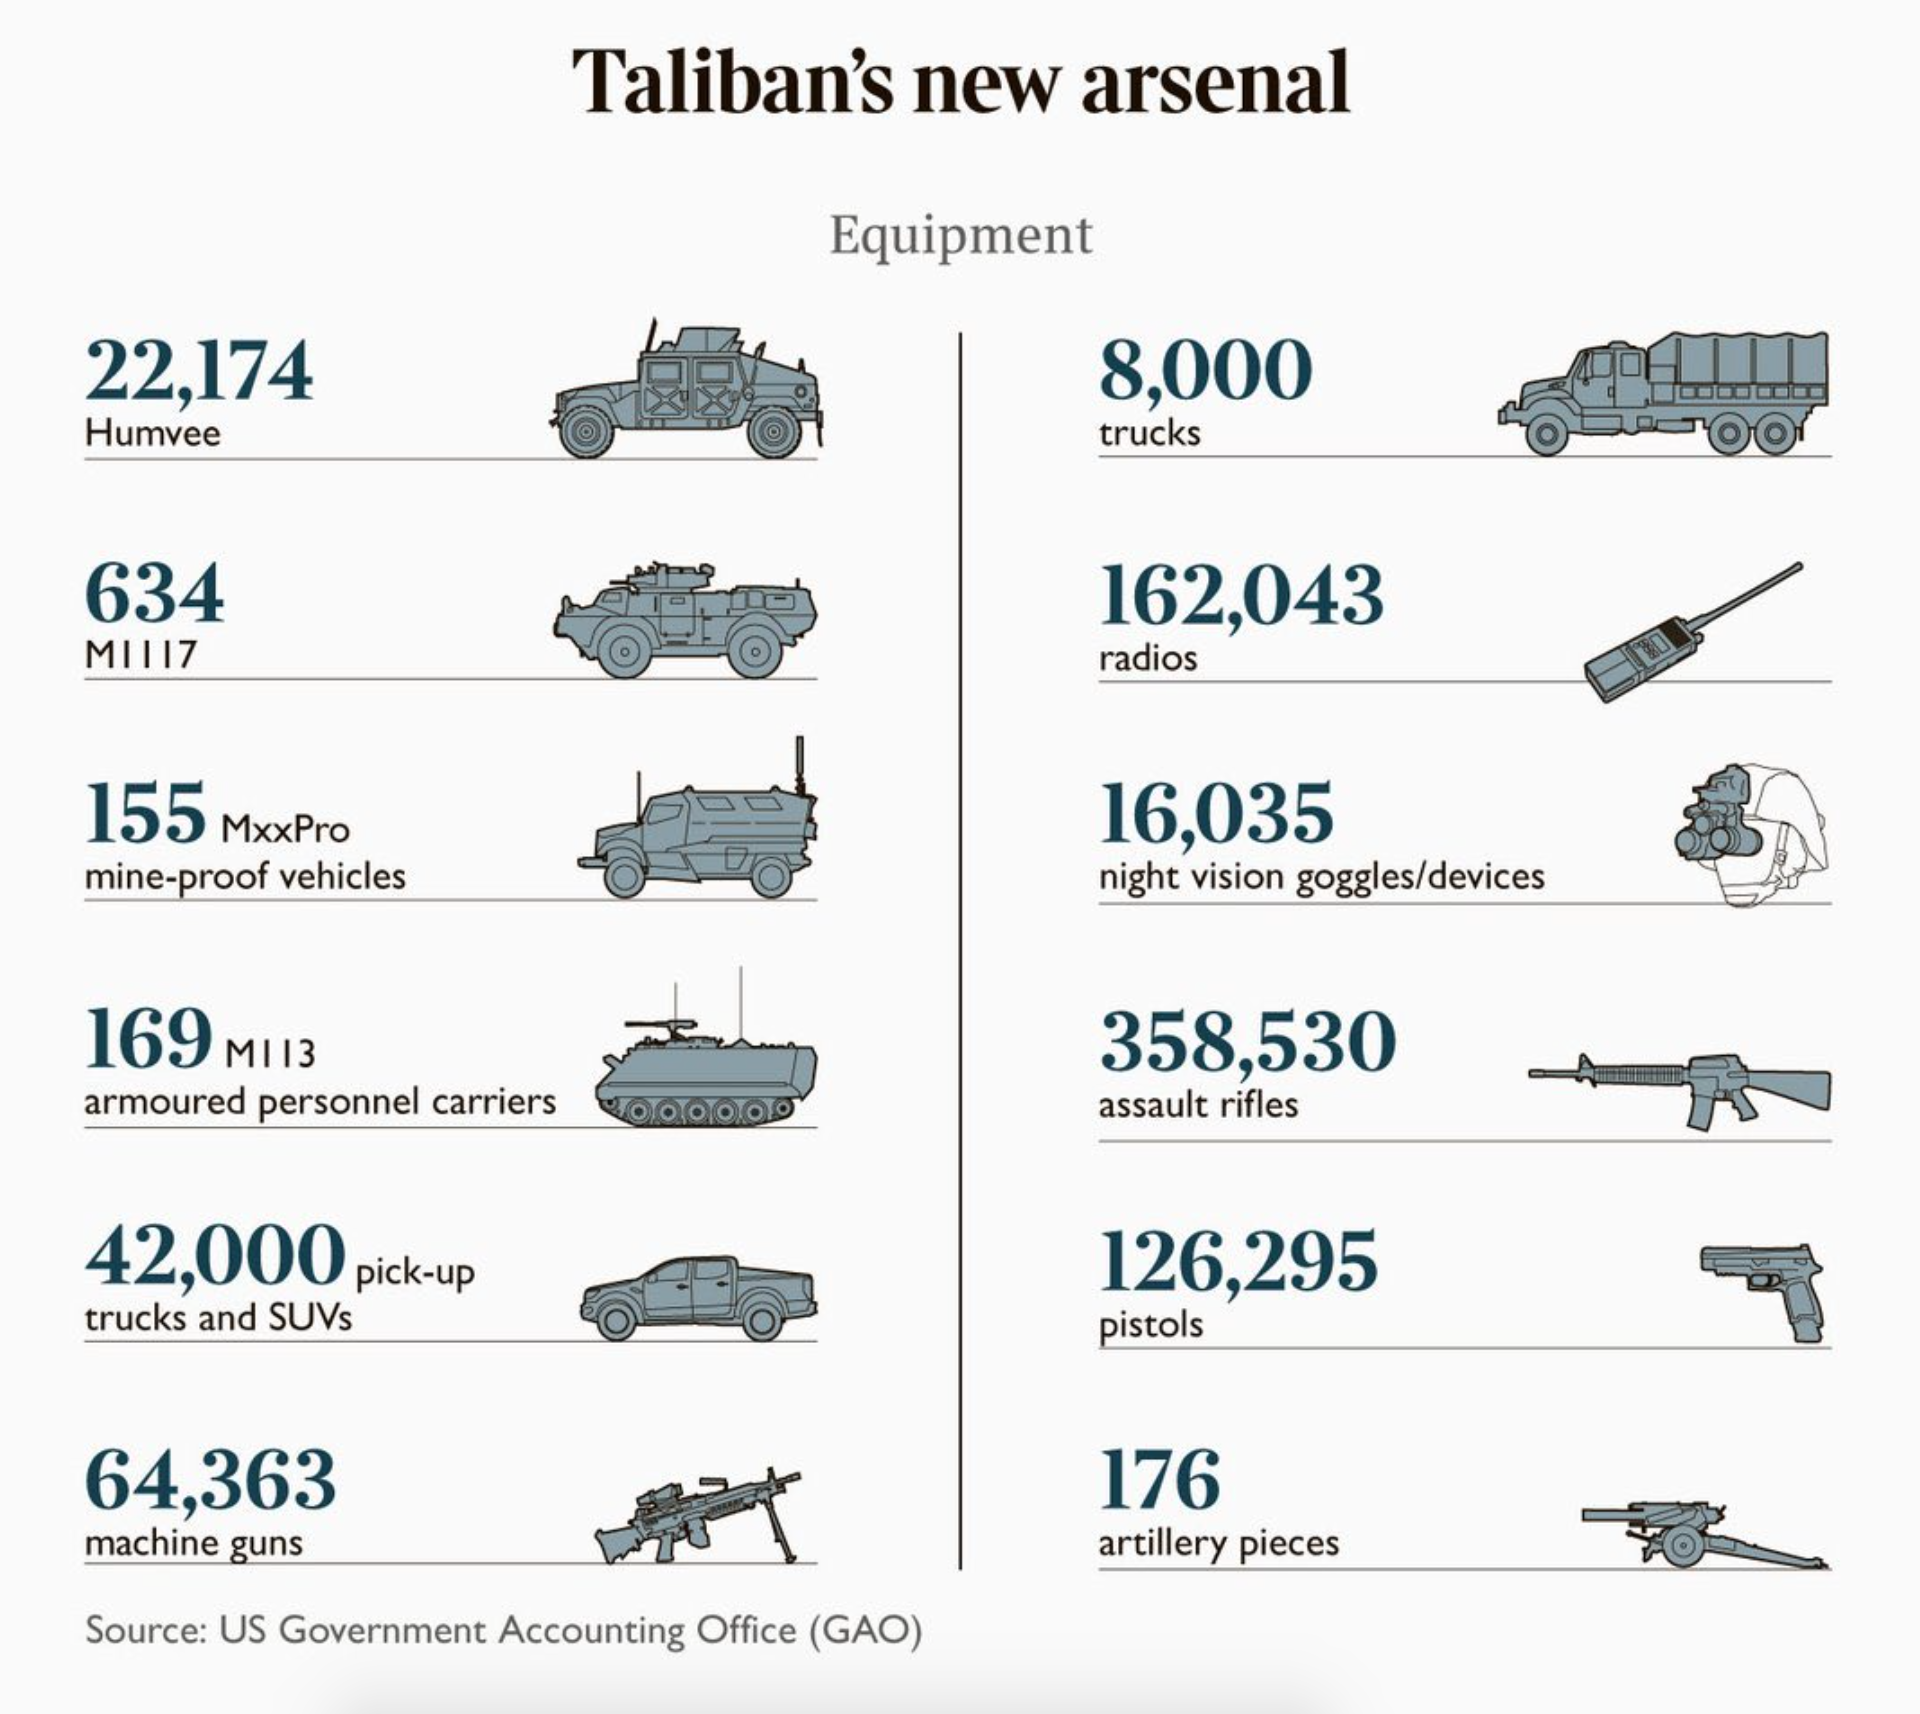 Helpful Guides to life - taliban's new arsenal - Taliban's new arsenal Equipment 22,174 Humvee 8,000 trucks 634 MIL17 162,043 radios 155 MxPro mineproof vehicles 16,035 night vision gogglesdevices 169 M113 armoured personnel carriers 358,530 assault rifle